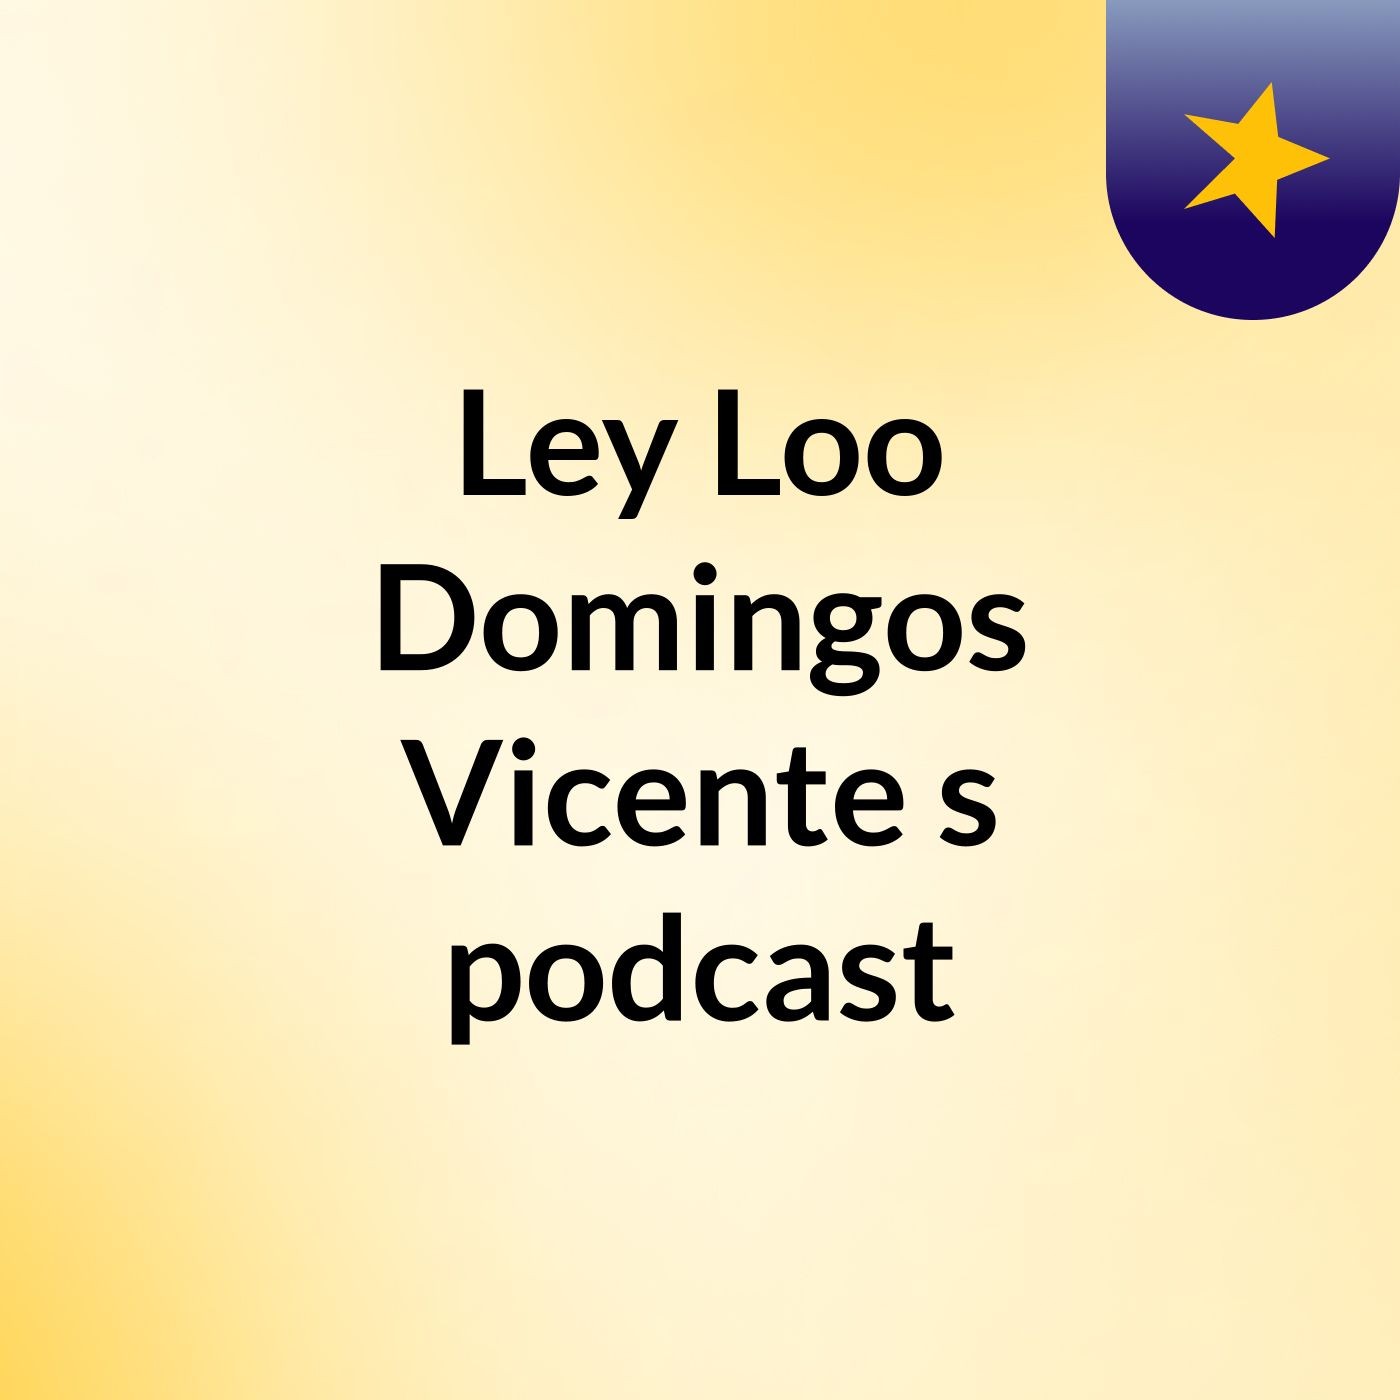 Ley Loo Domingos Vicente's podcast